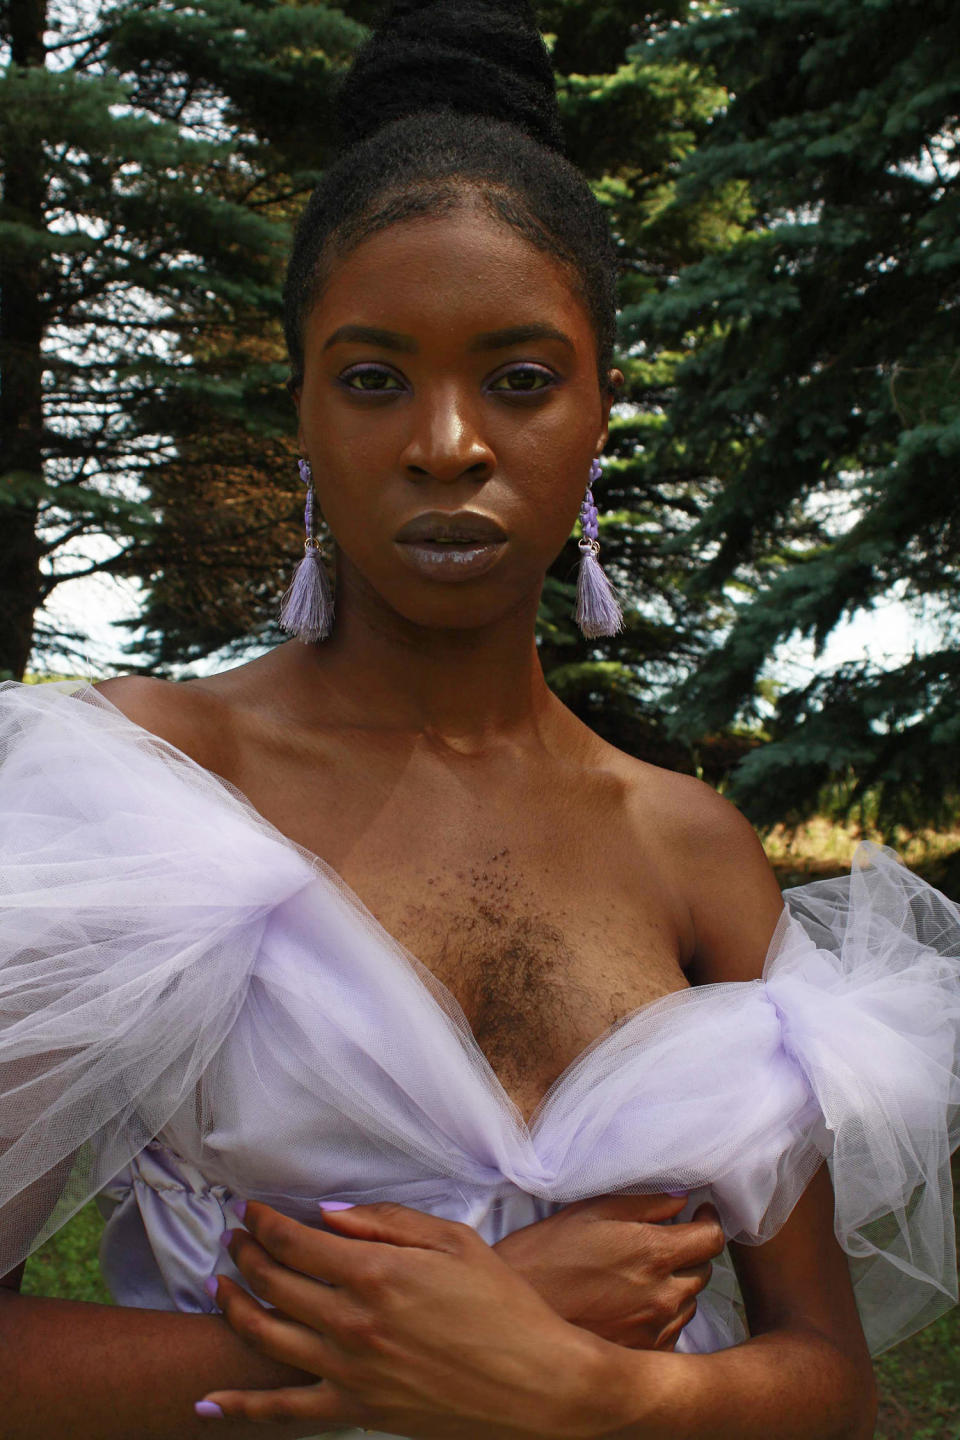 Calixte-Bea says at age 27, she can't imagine getting rid of her chest hair. (Courtesy Esther Calixte-Bea)